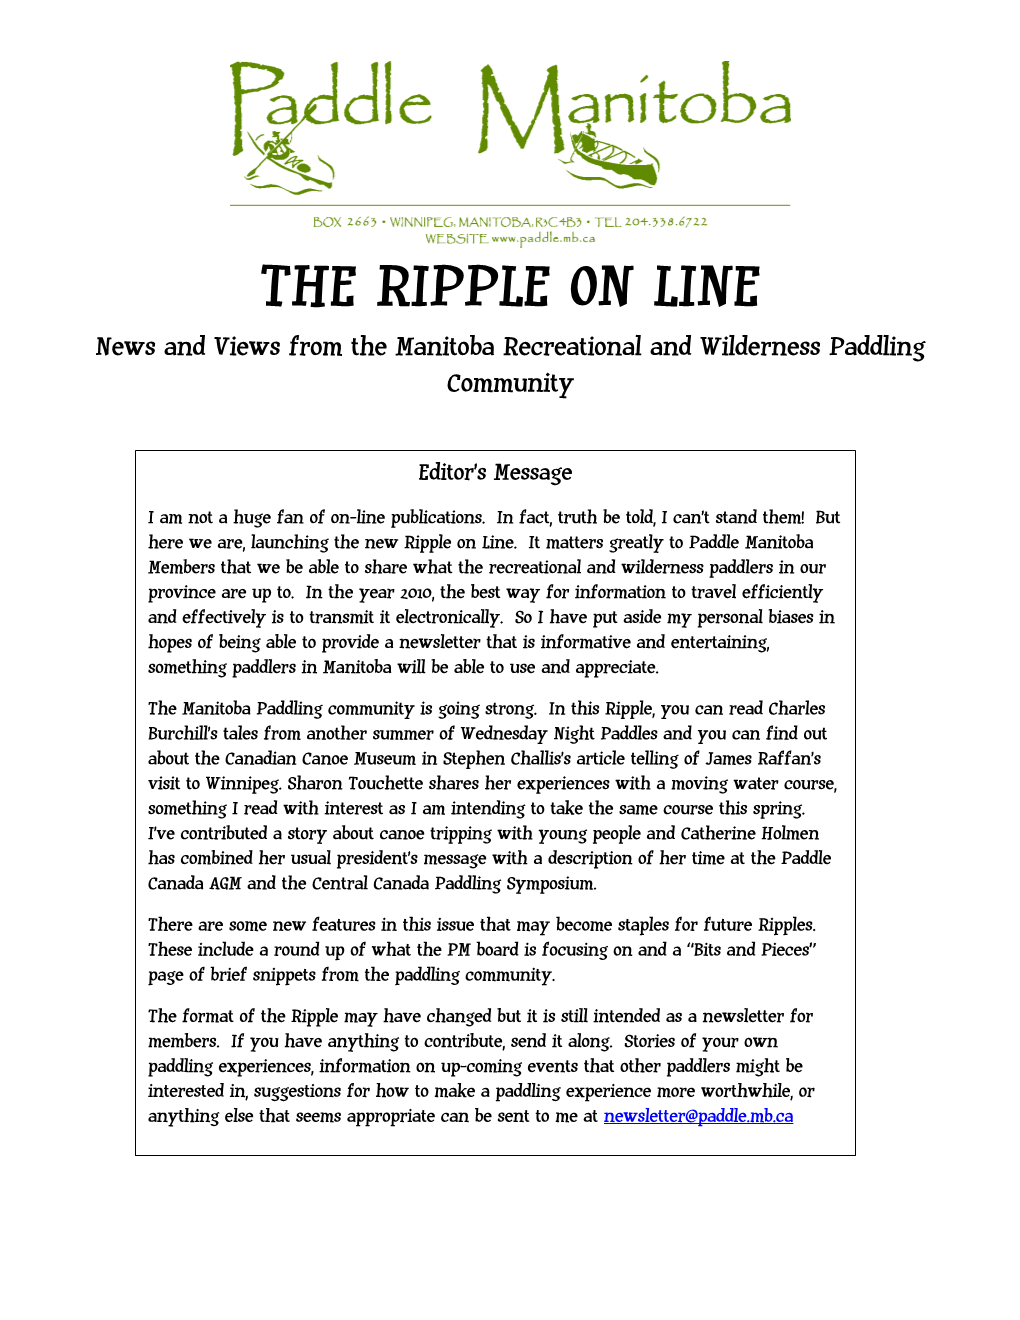 THE RIPPLE on LINE News and Views from the Manitoba Recreational and Wilderness Paddling Community